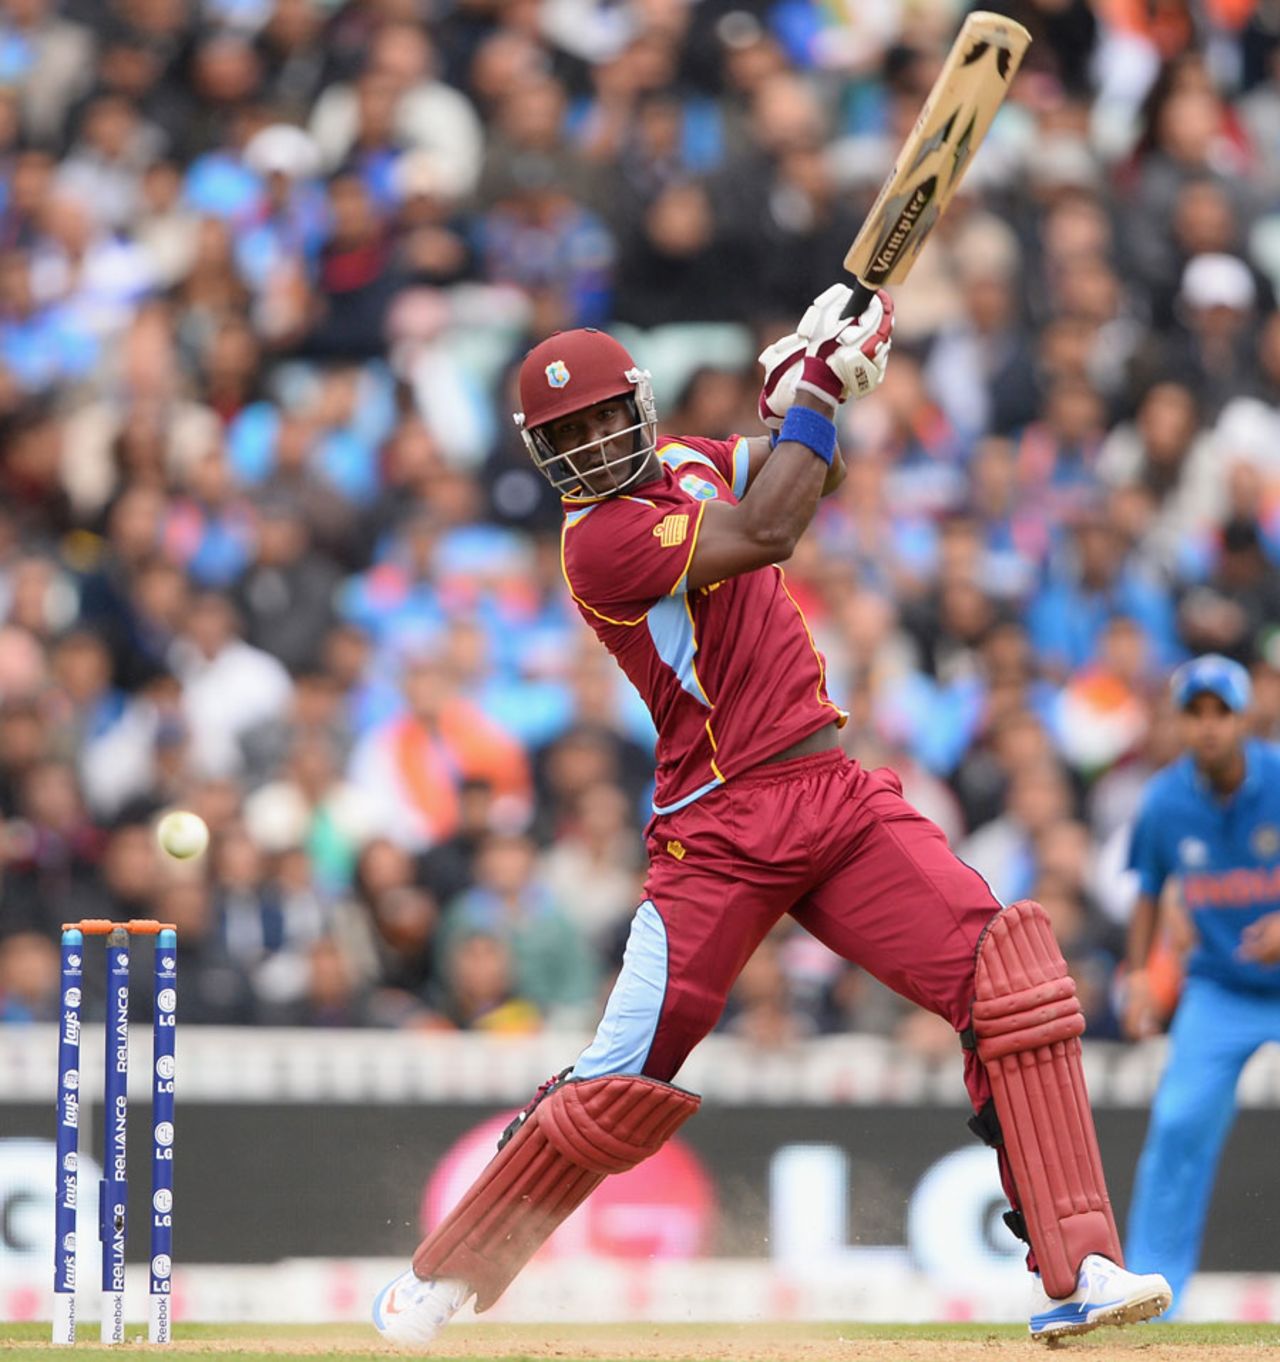 Darren Sammy hits out to the off side, India v West Indies, Champions Trophy, Group B, The Oval, June 11, 2013